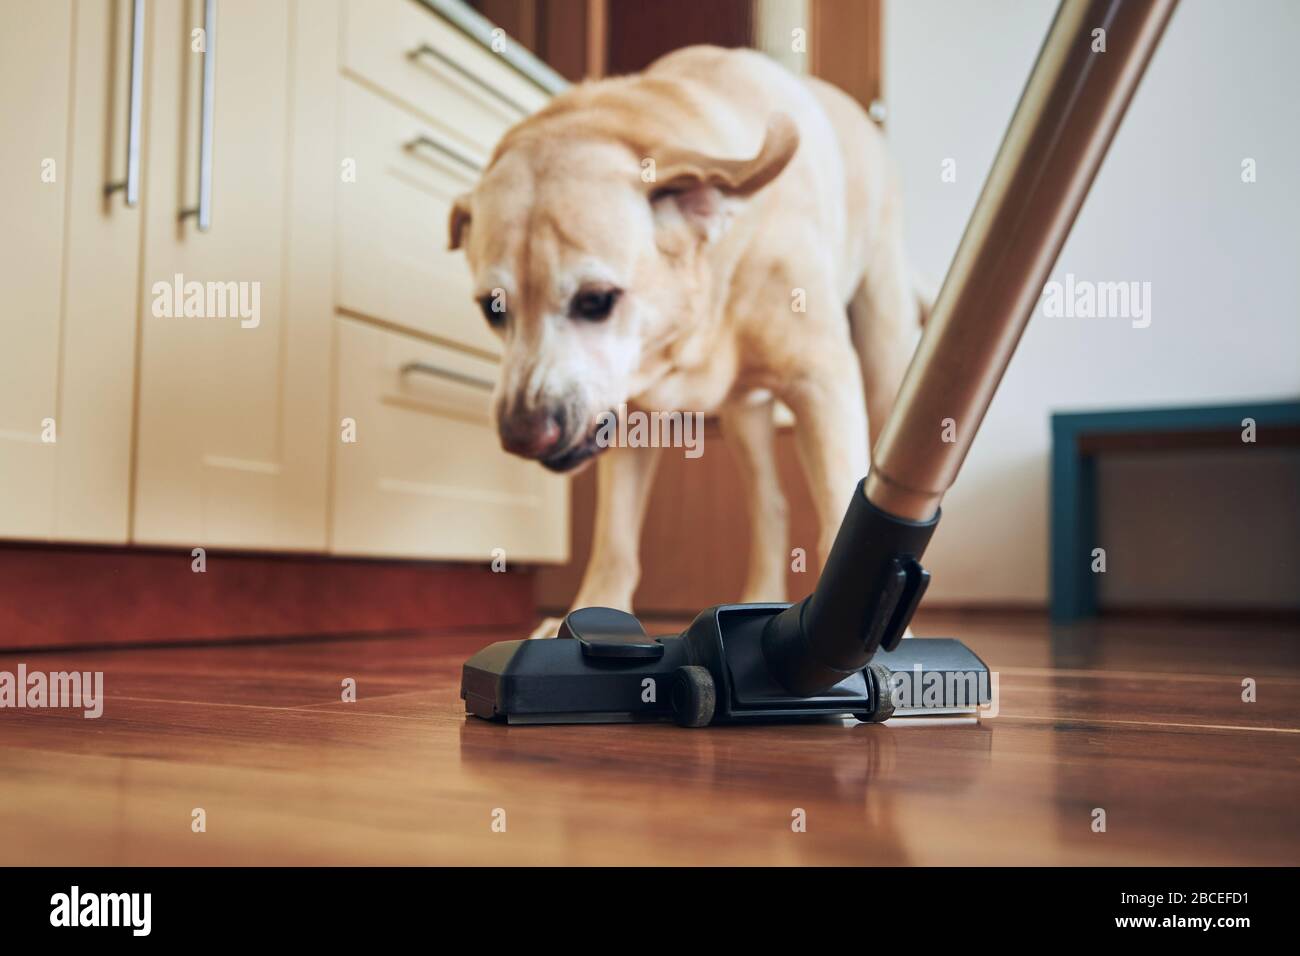 Naughty dog barking on vacuum cleaner during house cleaning. Stock Photo